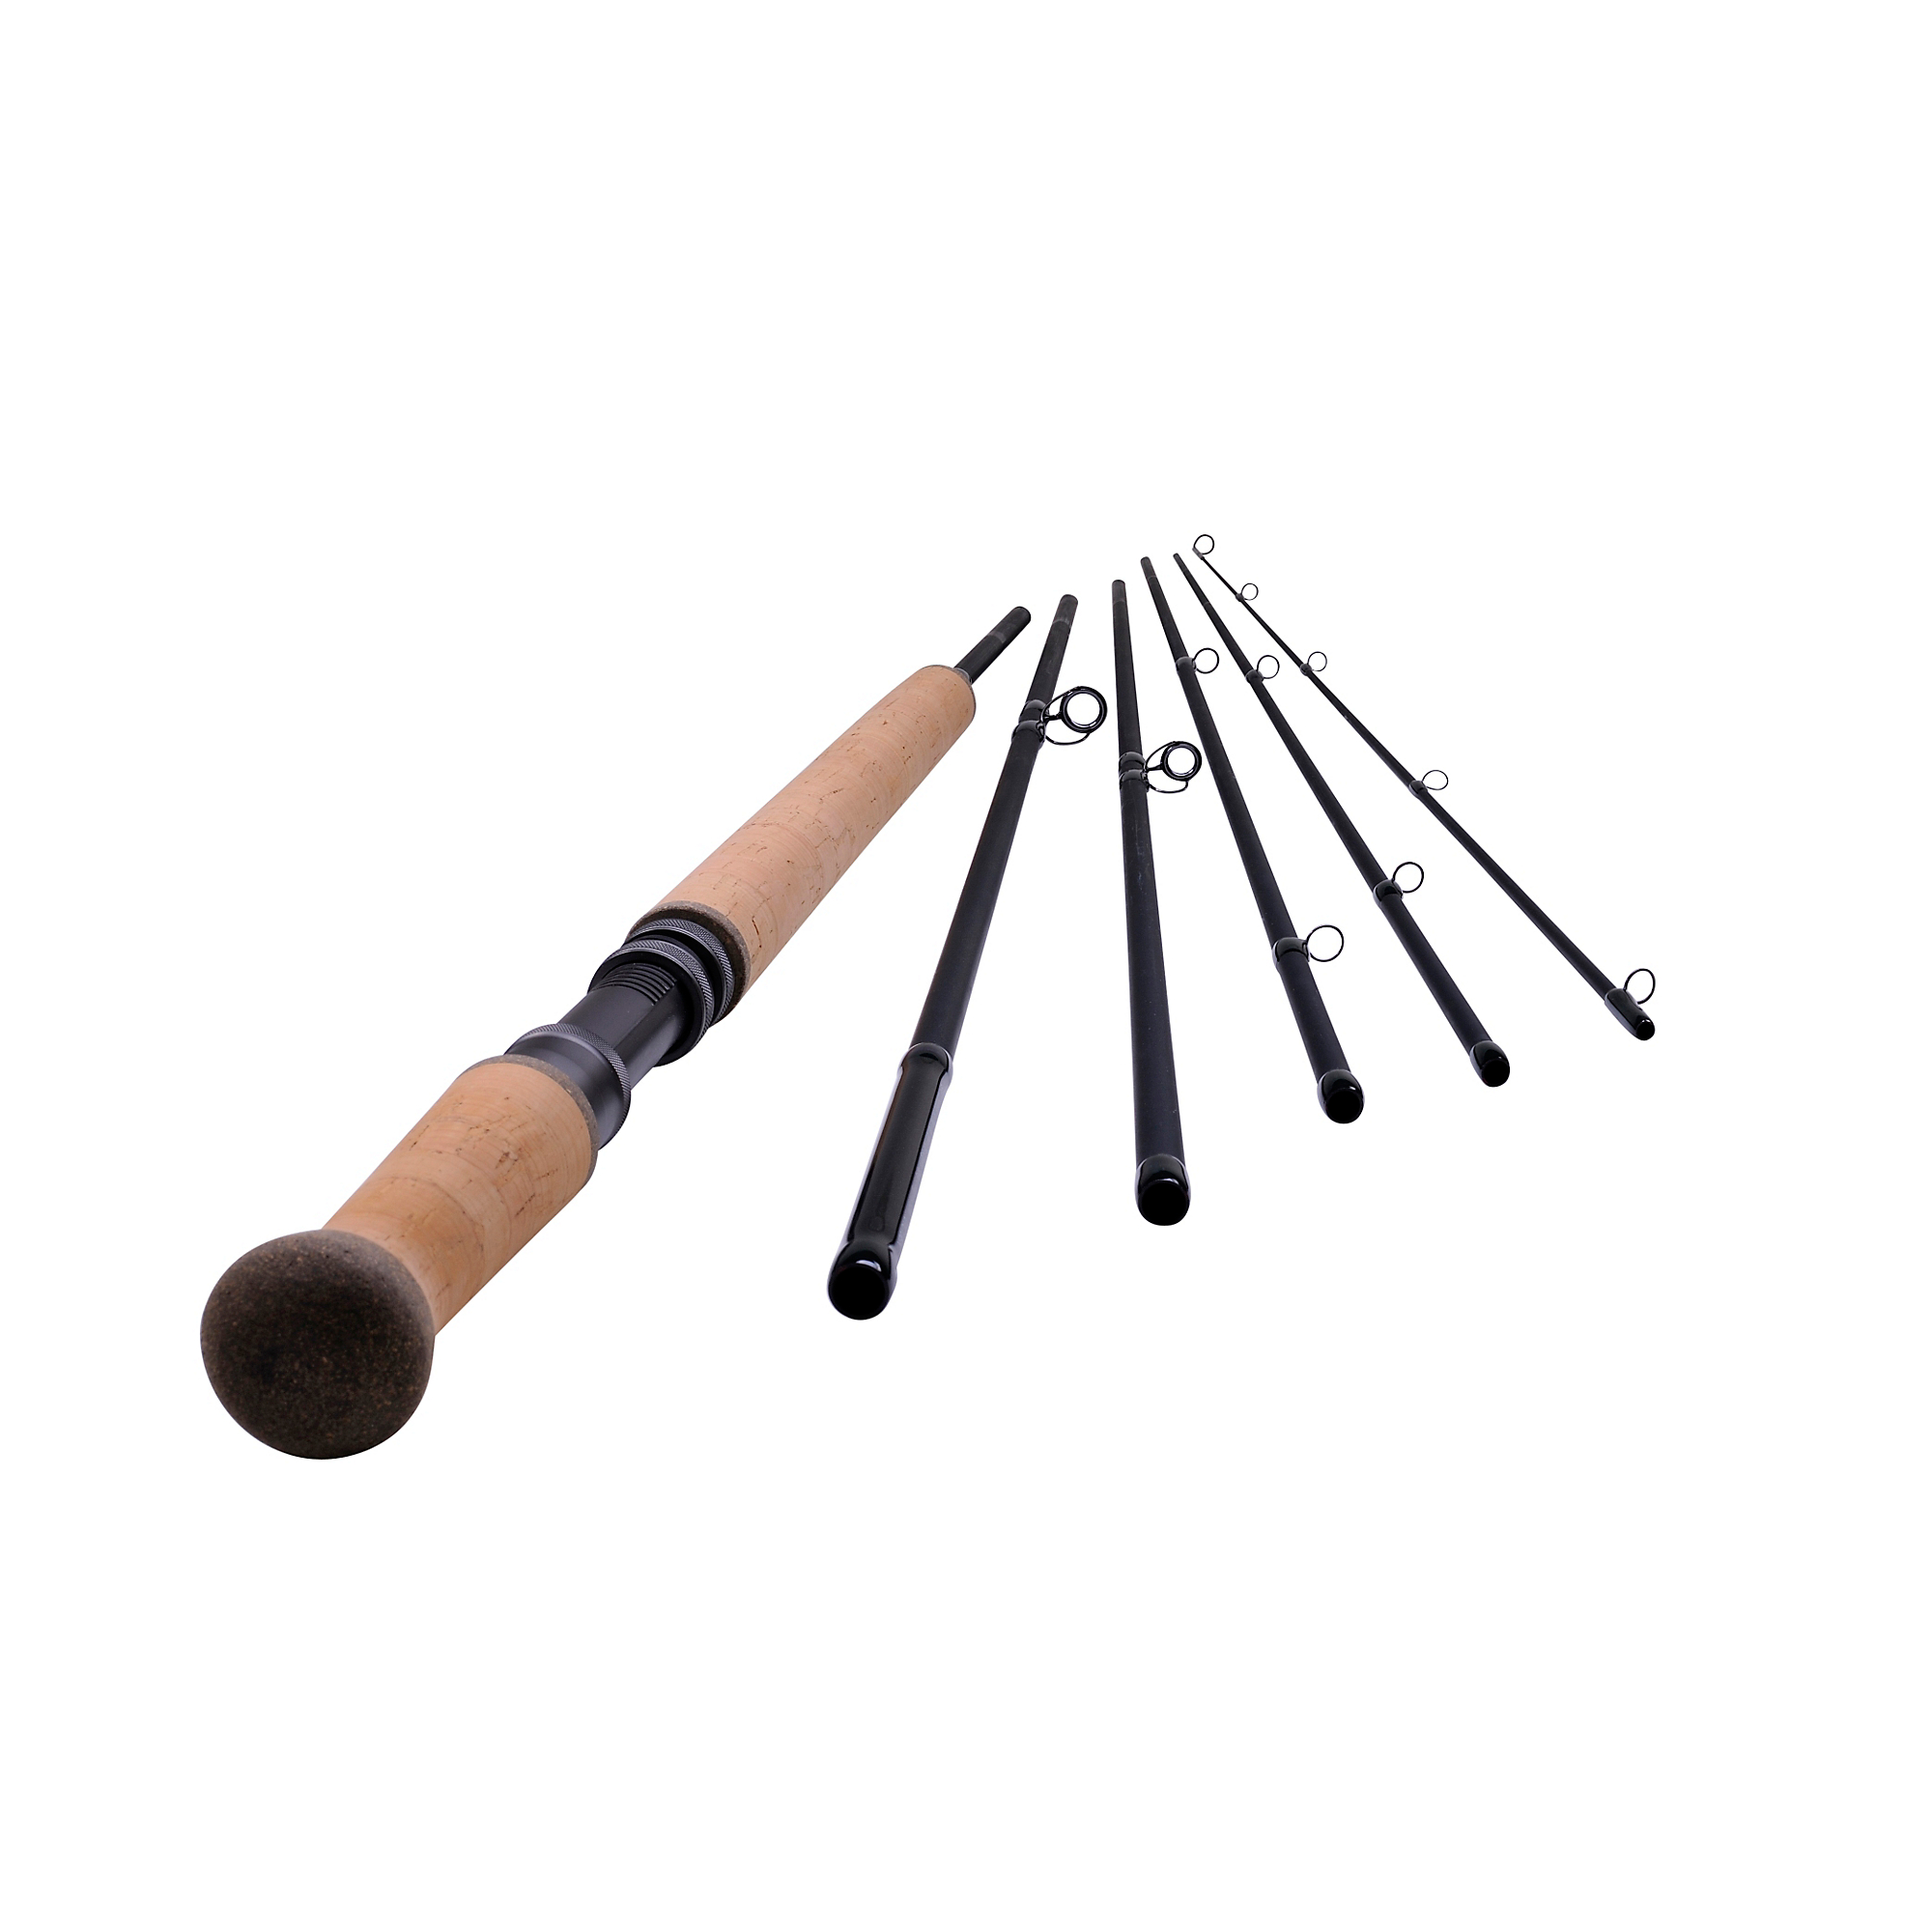 Shakespeare Oracle Expedition Salmon Fly Rod